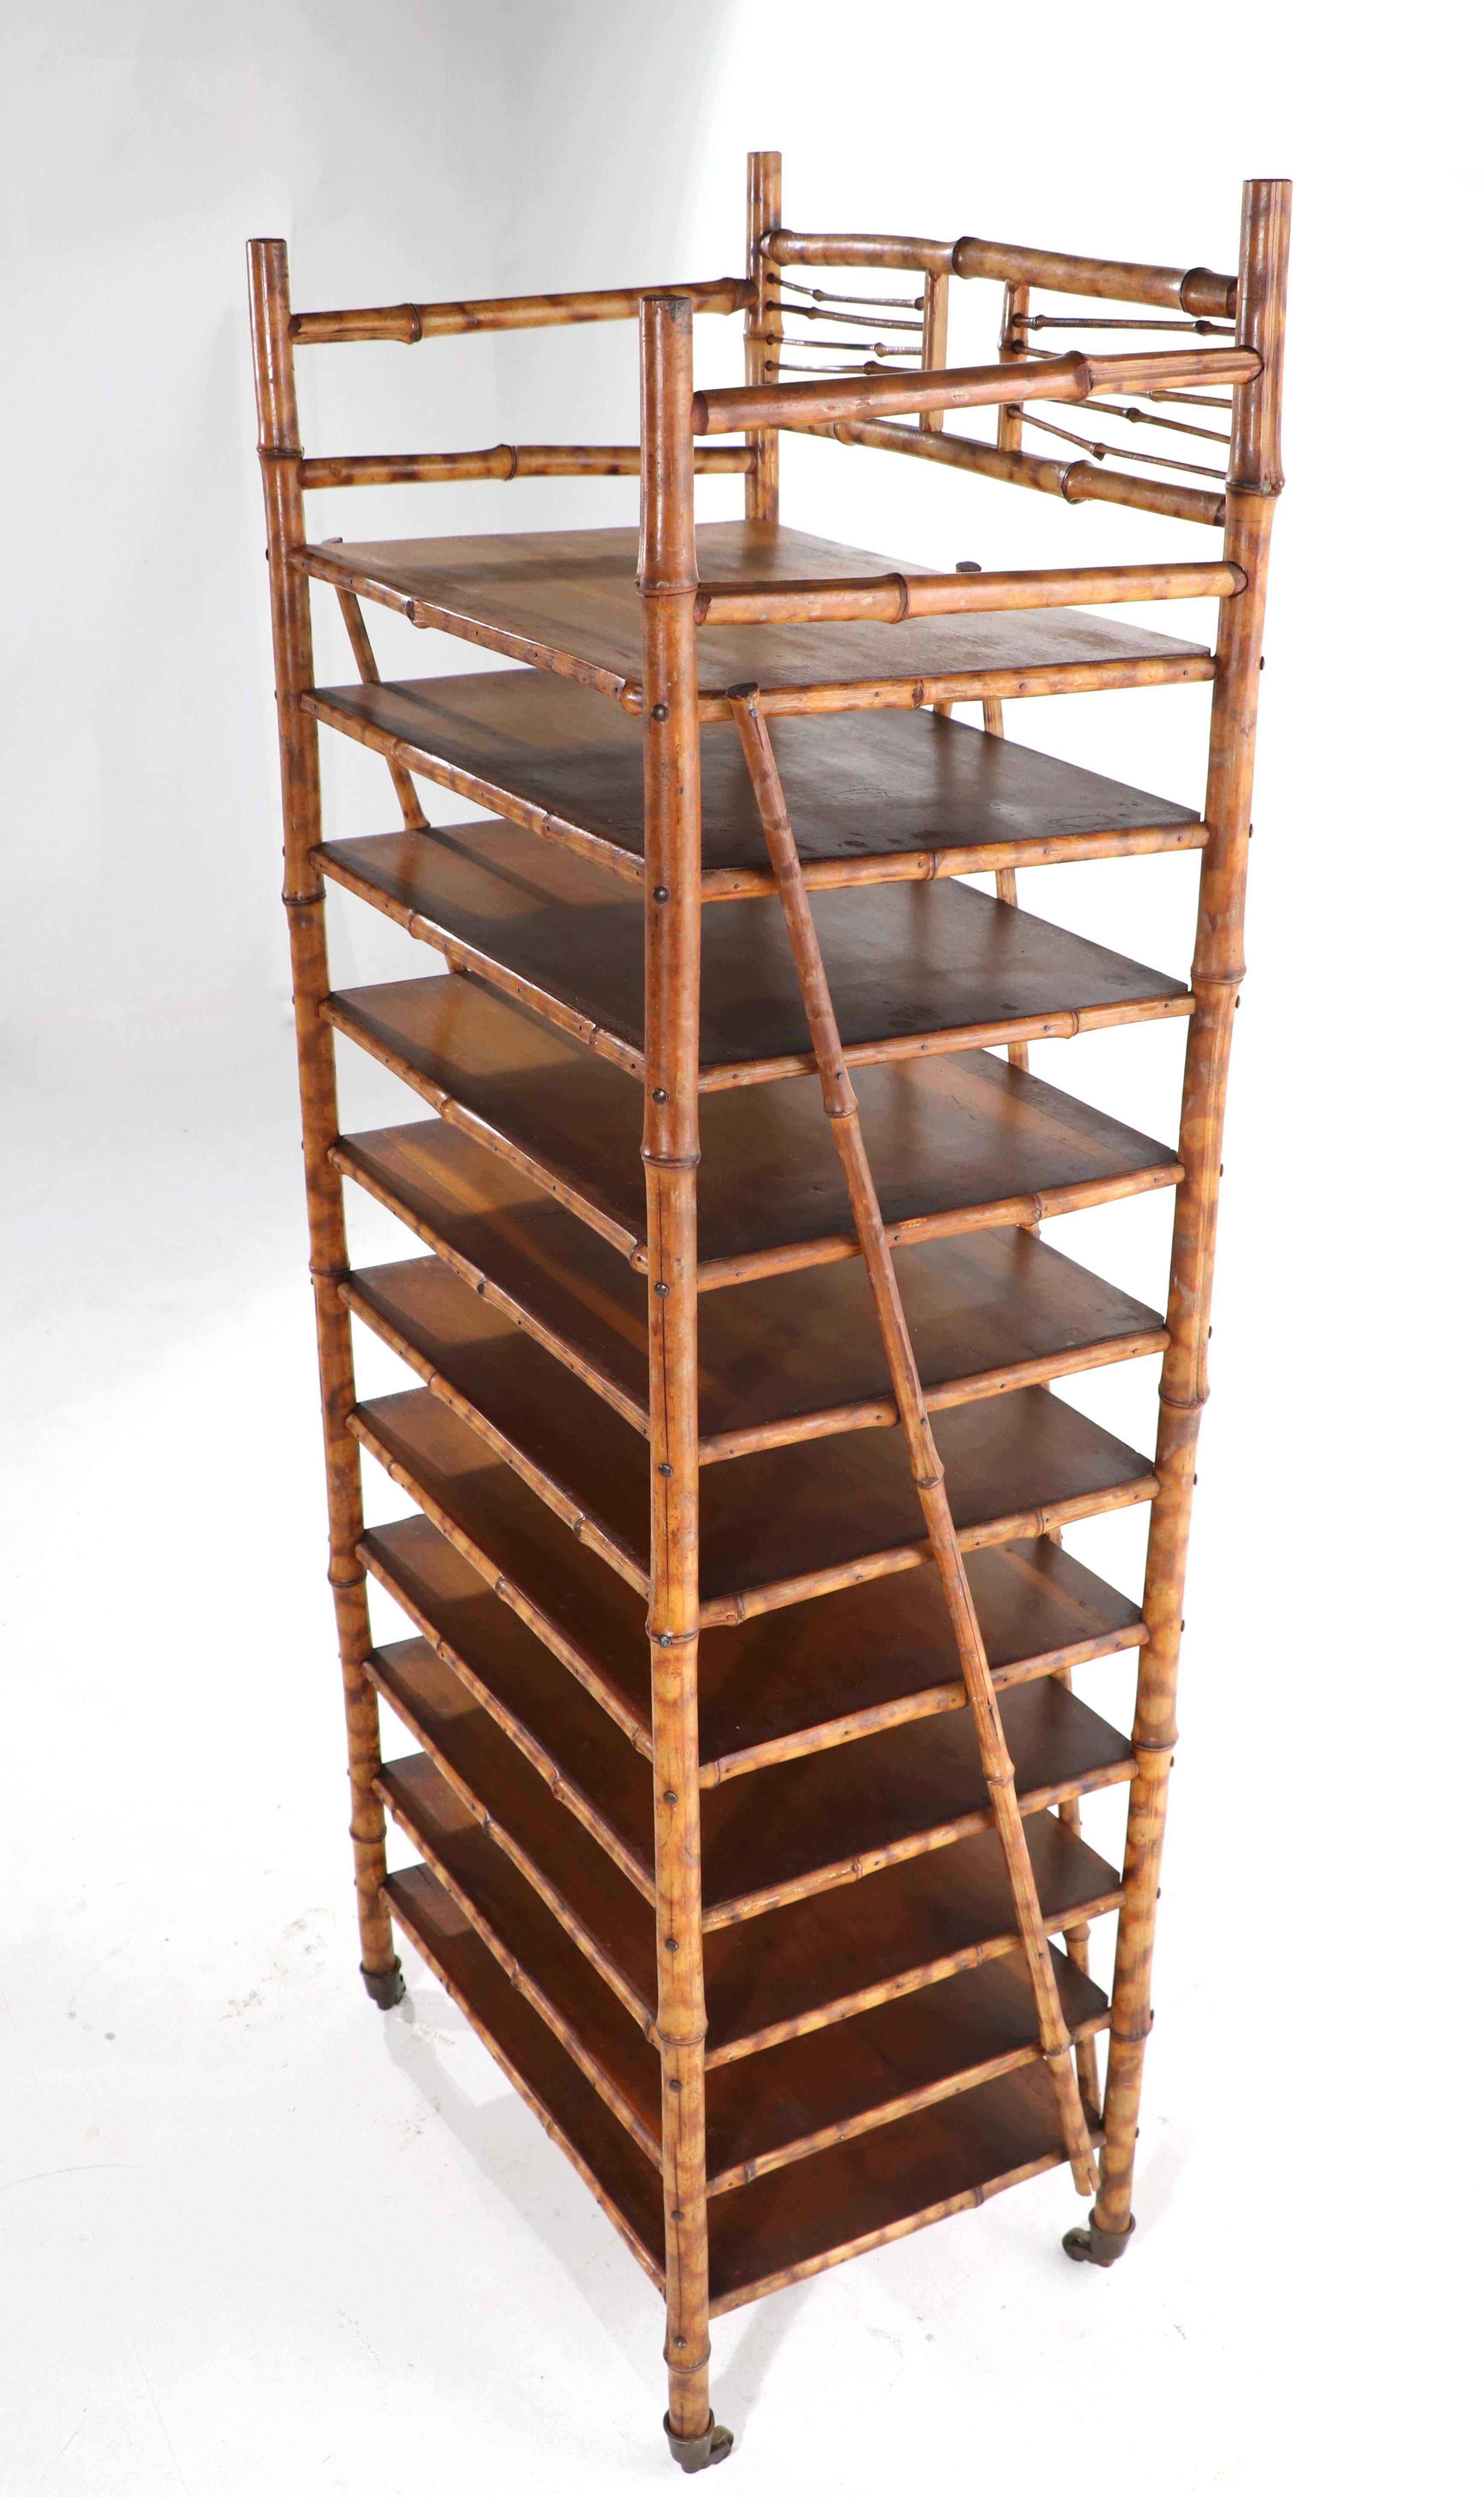 Unusual antique bamboo shelf having 11 shelves, each 2.5 inch lower than the next, making this stylish shelf perfect for storing and organizing paper documents, artwork etc. Chic architectural form, great original condition, clean and ready to use